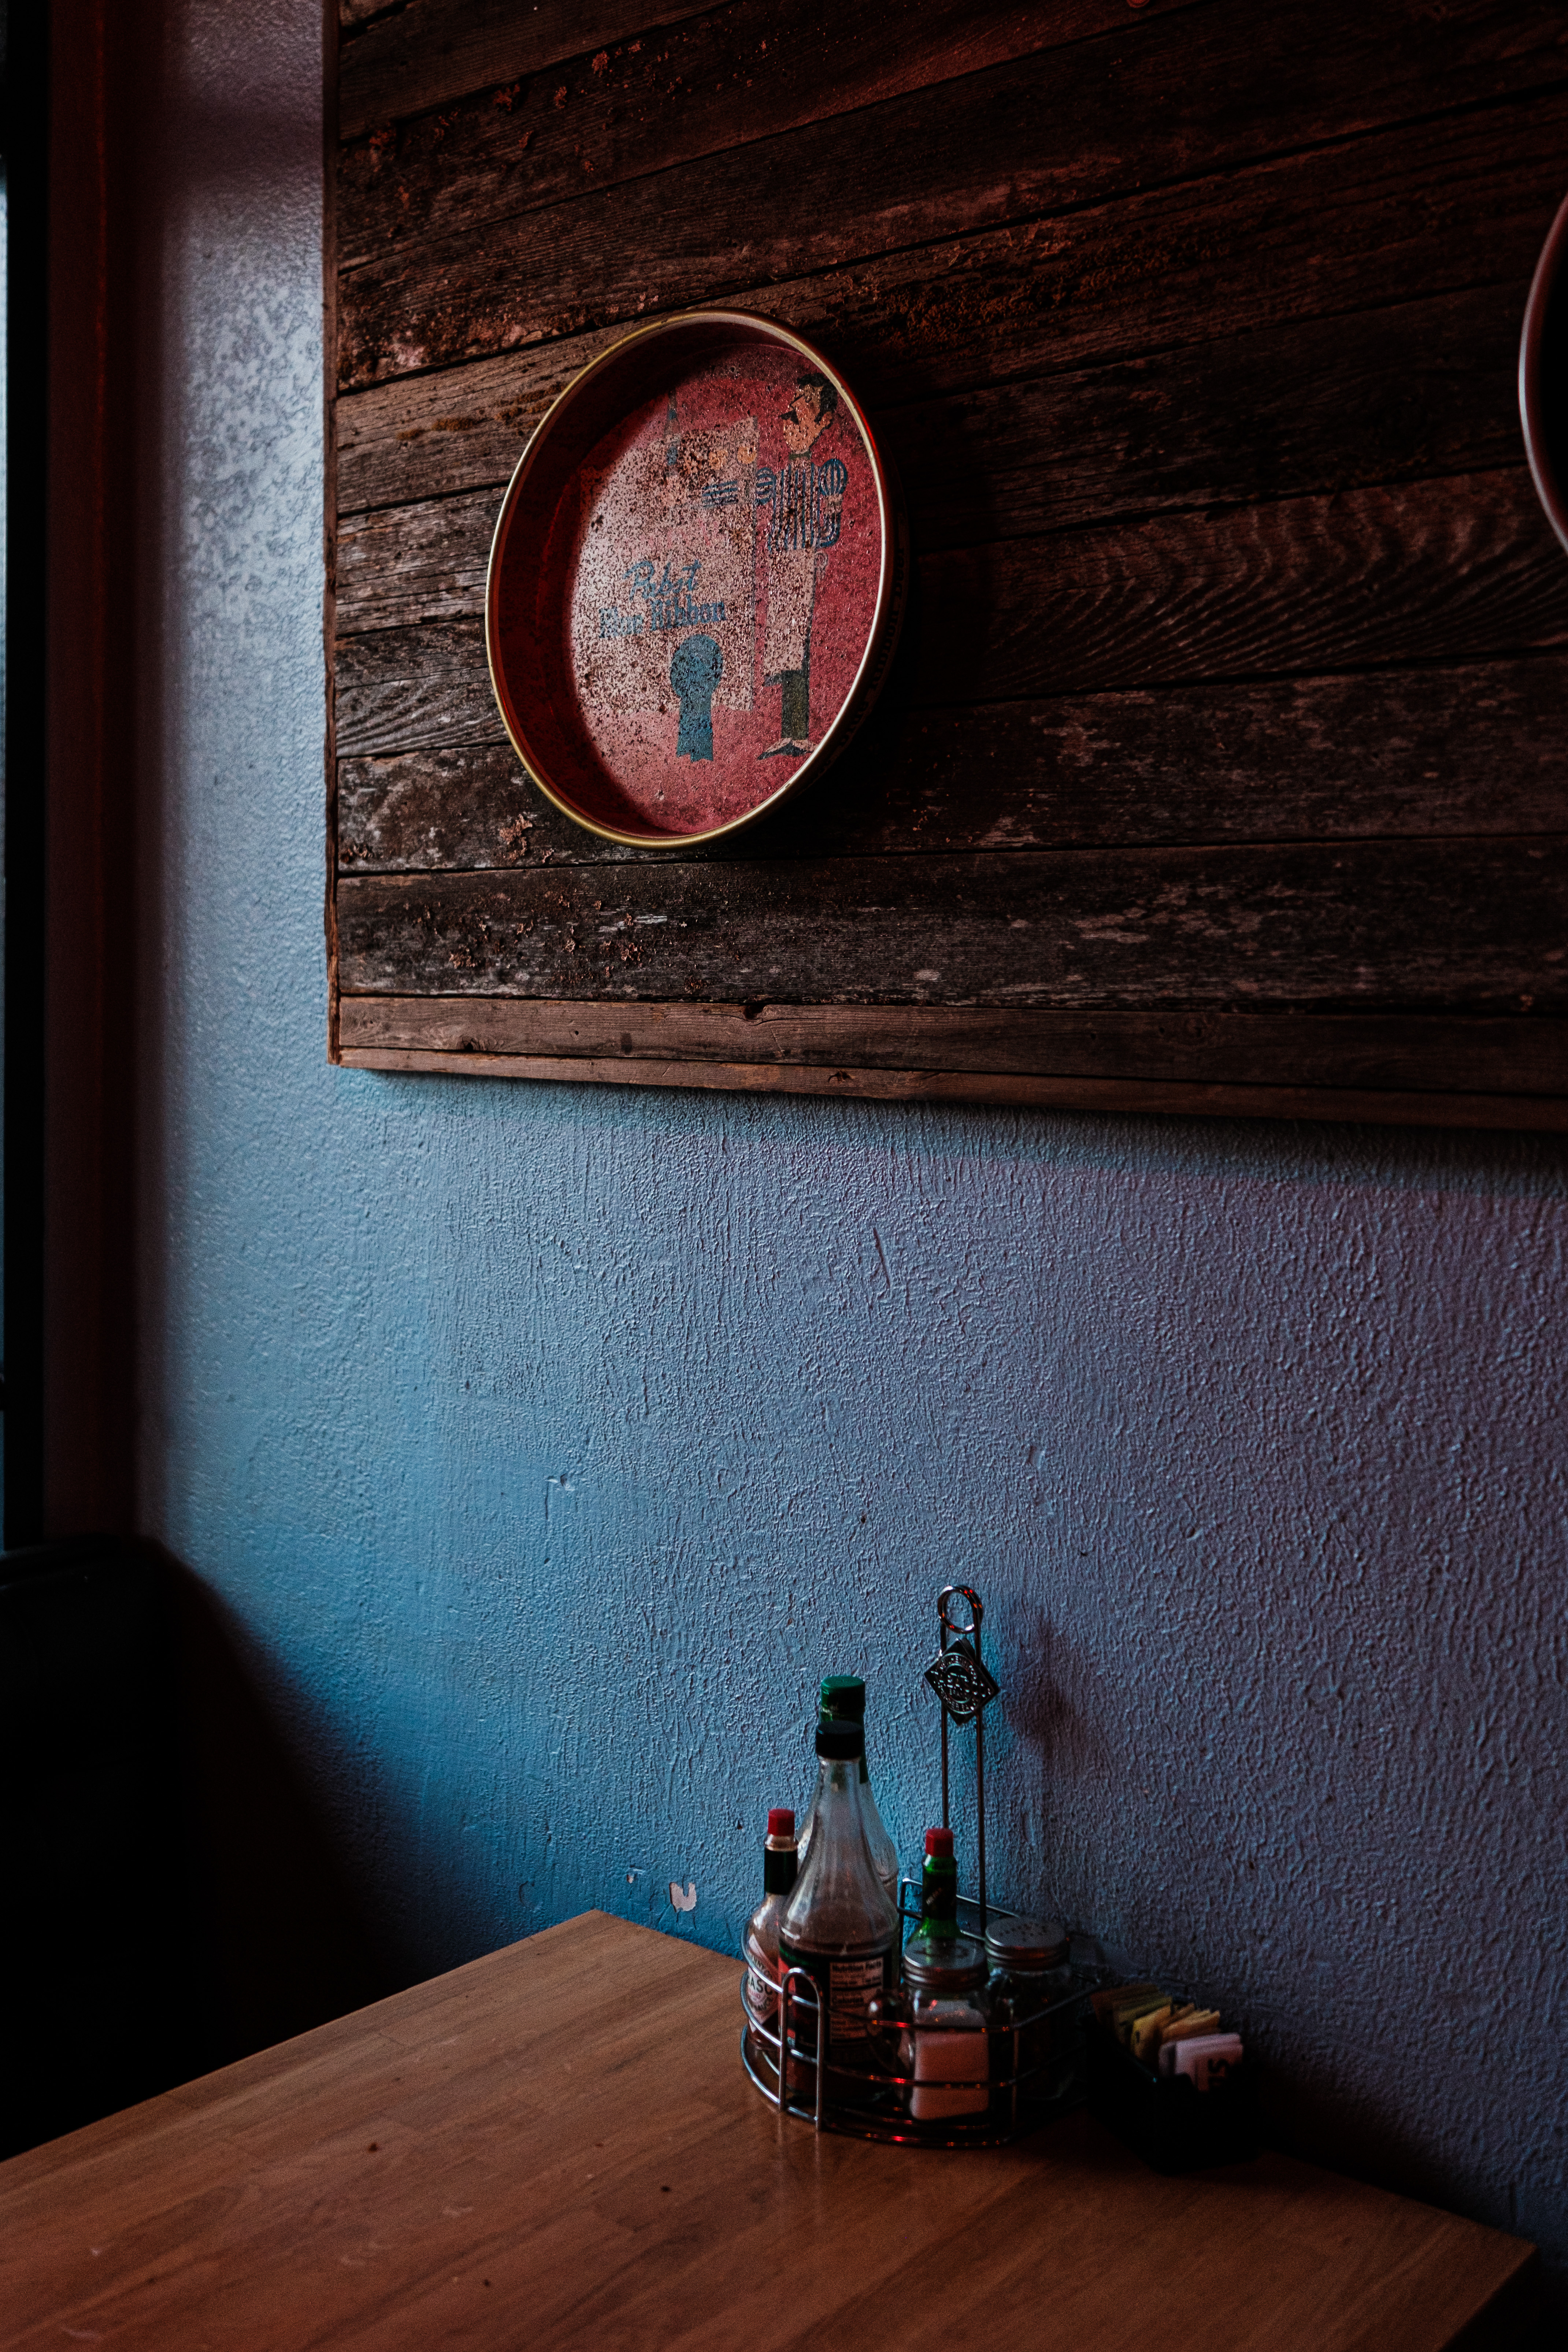 A wooden table in a cafe in partial shadows. Blue wall. Decorative red enamel plate.